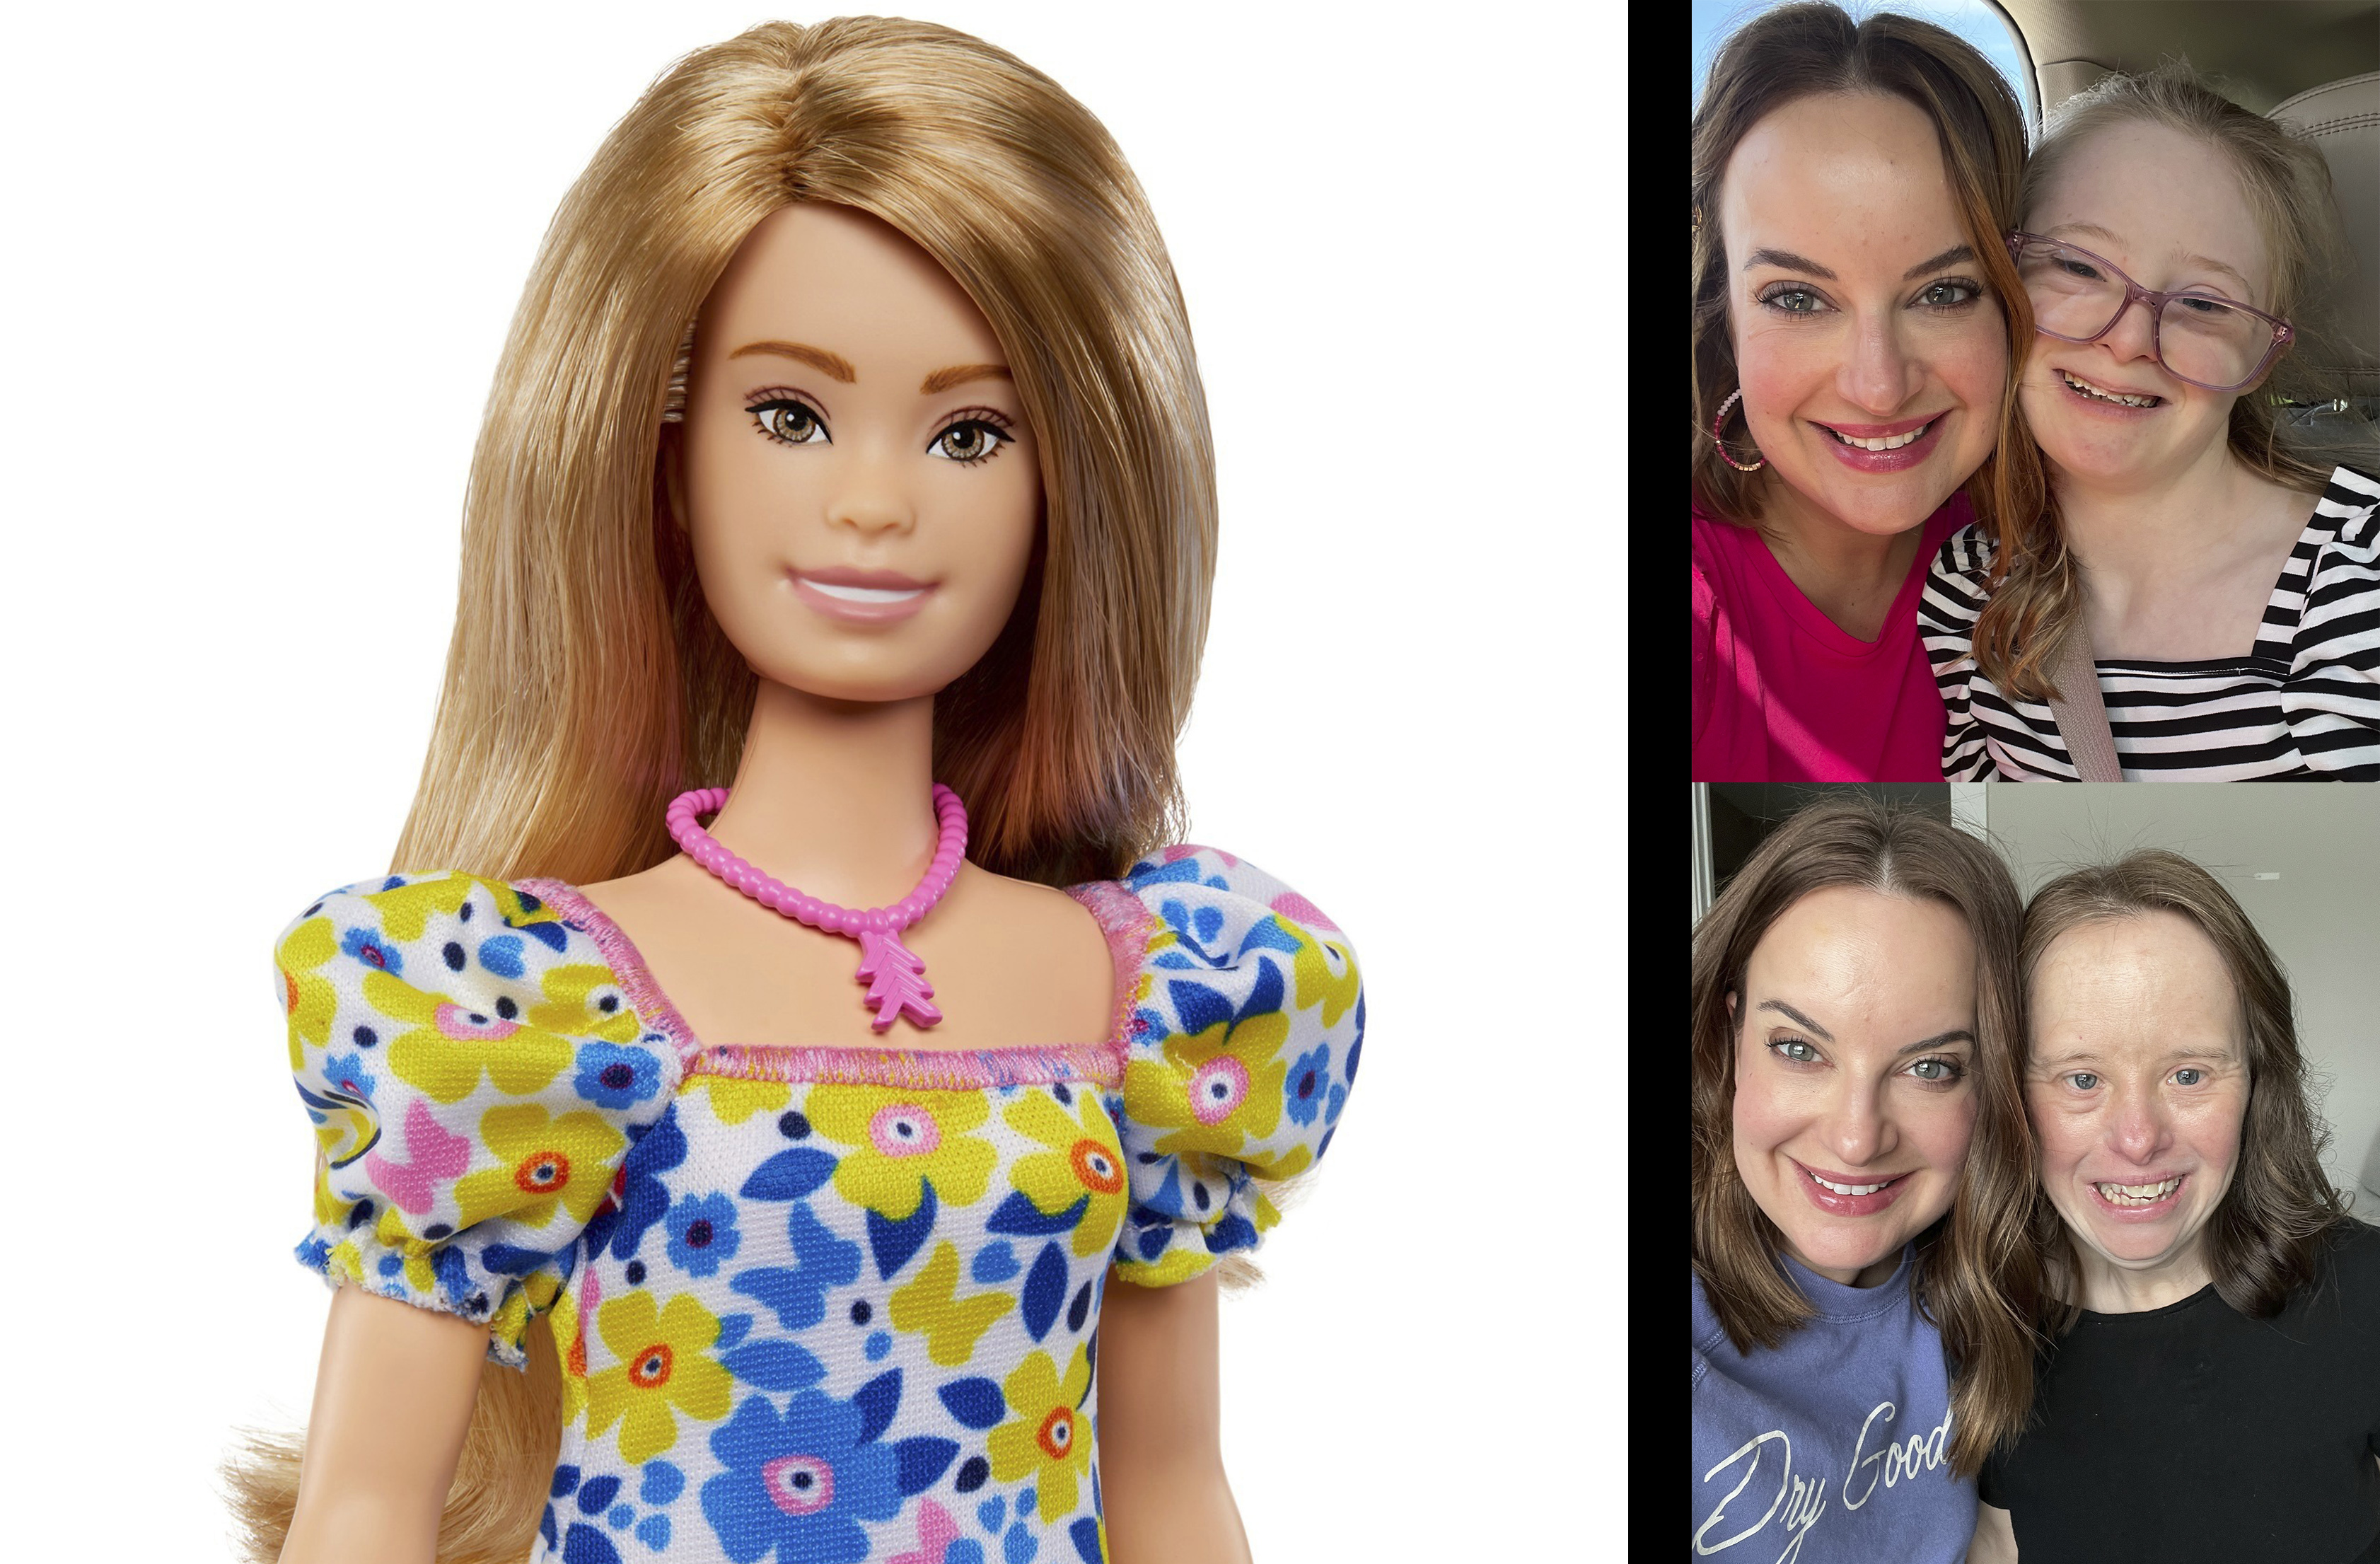 Barbie and Ken Get Hearing Aids and Prosthetic Limbs for Diversity: Photos